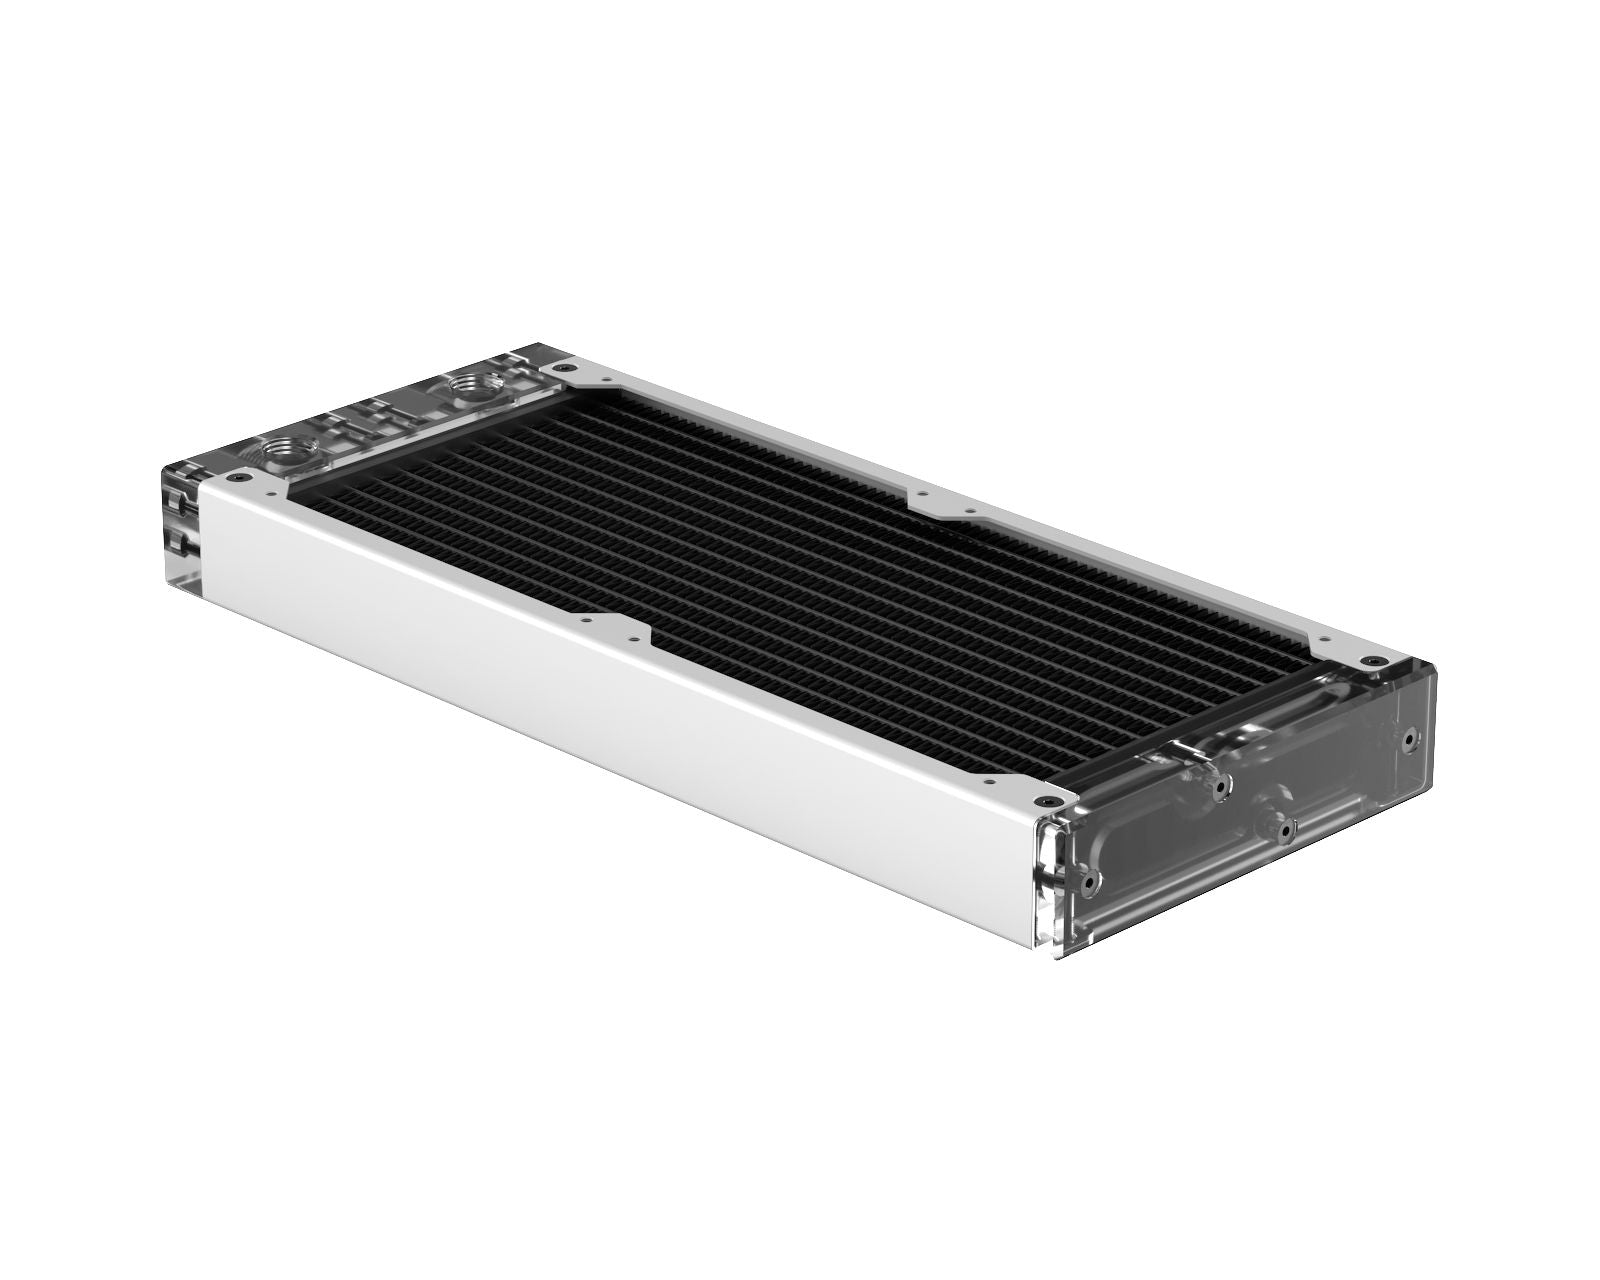 PrimoChill 240SL (30mm) EXIMO Modular Radiator, Clear Acrylic, 2x120mm, Dual Fan (R-SL-A24) Available in 20+ Colors, Assembled in USA and Custom Watercooling Loop Ready - Sky White